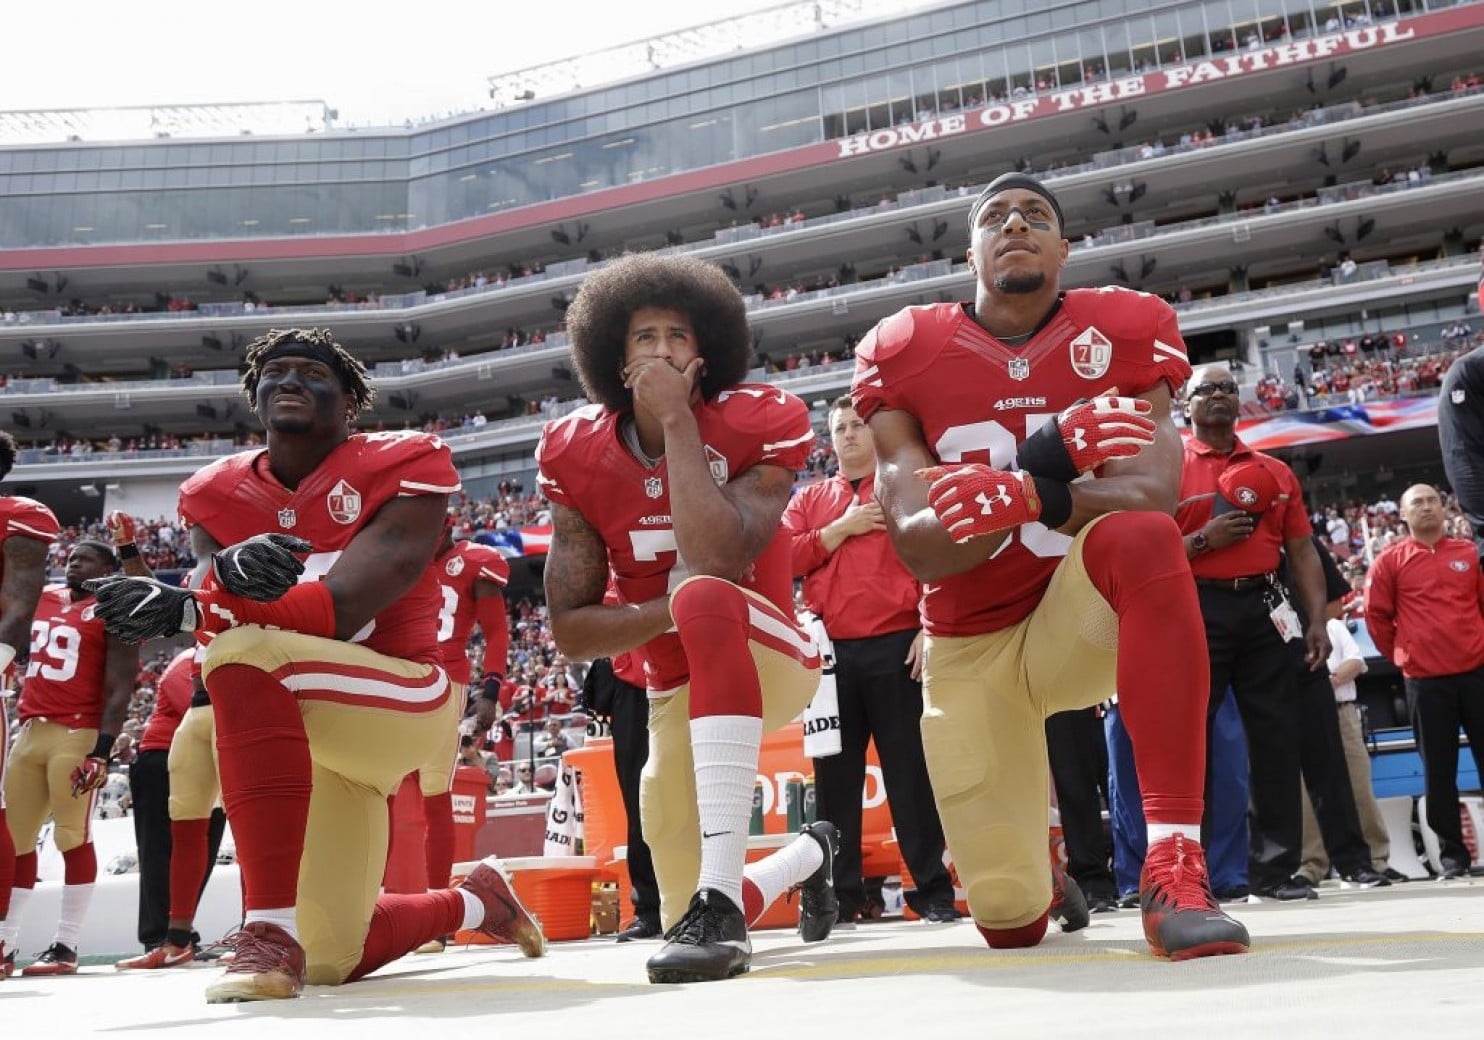 NFL reporter now says he never asked Kaepernick if he’d stand for anthem